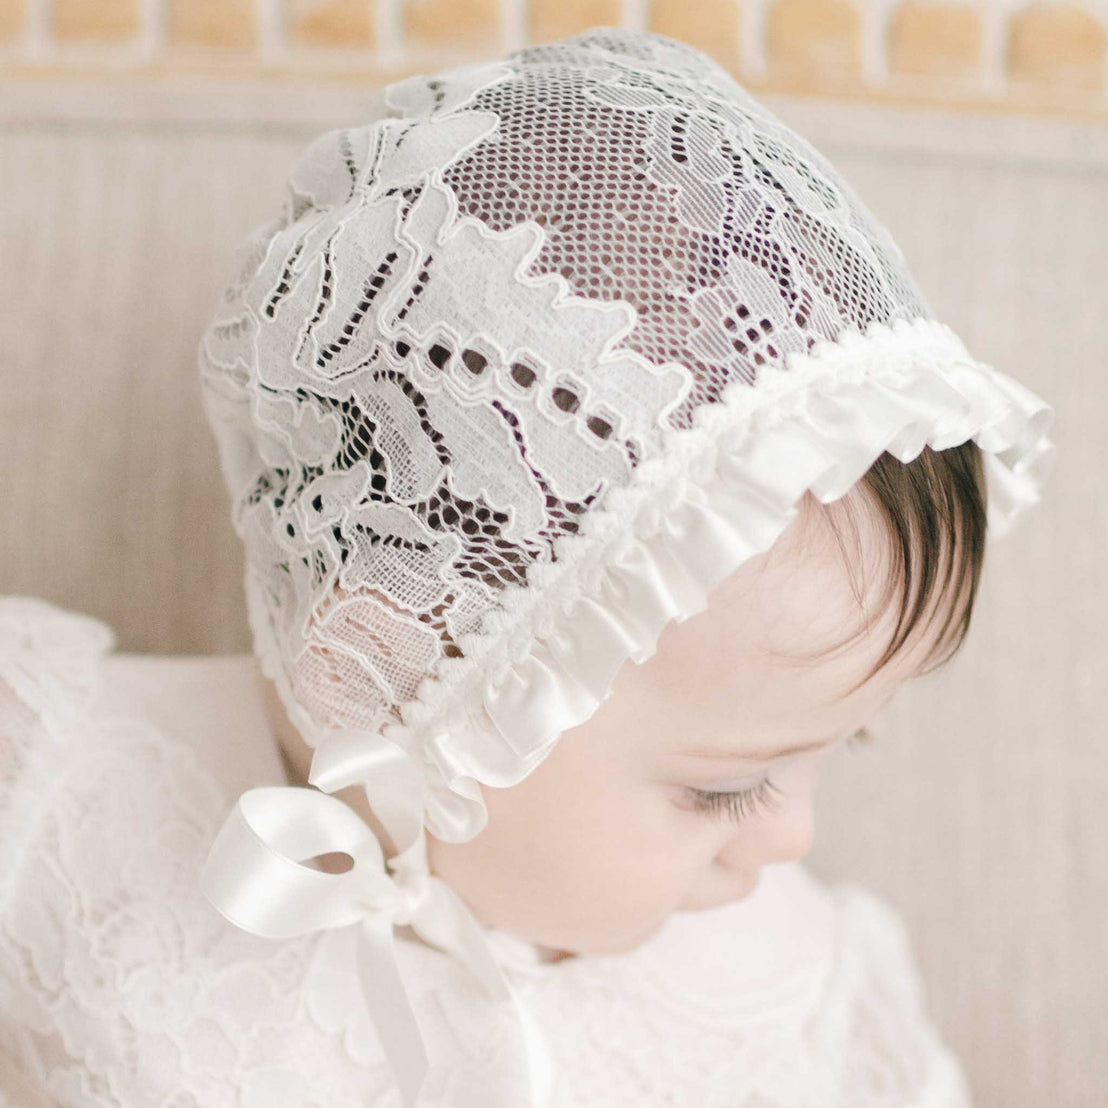 Side profile of baby girl wearing the Victoria Lace Christening Bonnet.